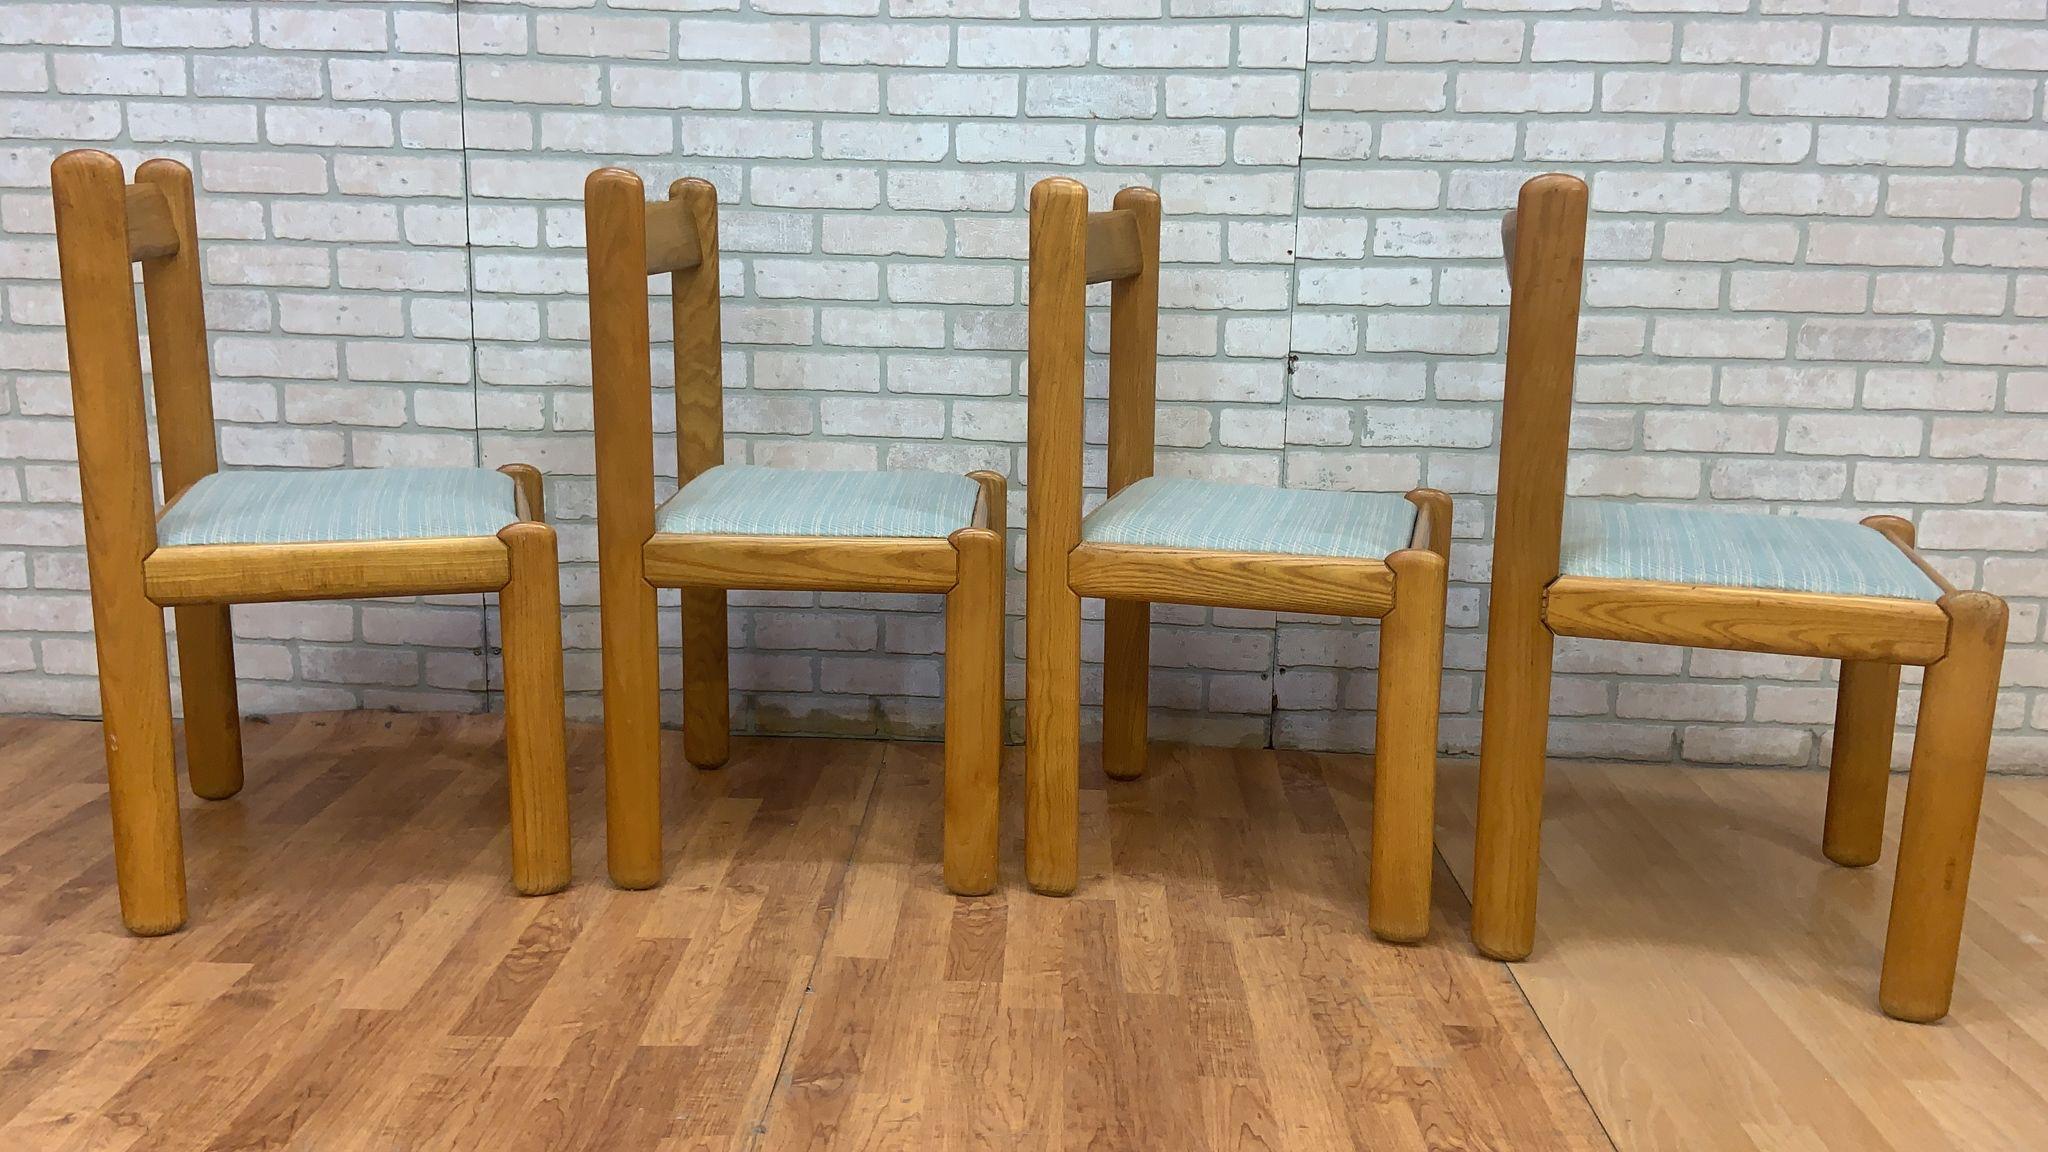 Hand-Crafted Vintage Italian Modern Vico Magistretti Style Blonde Beech Wood Chairs -Set of 4 For Sale